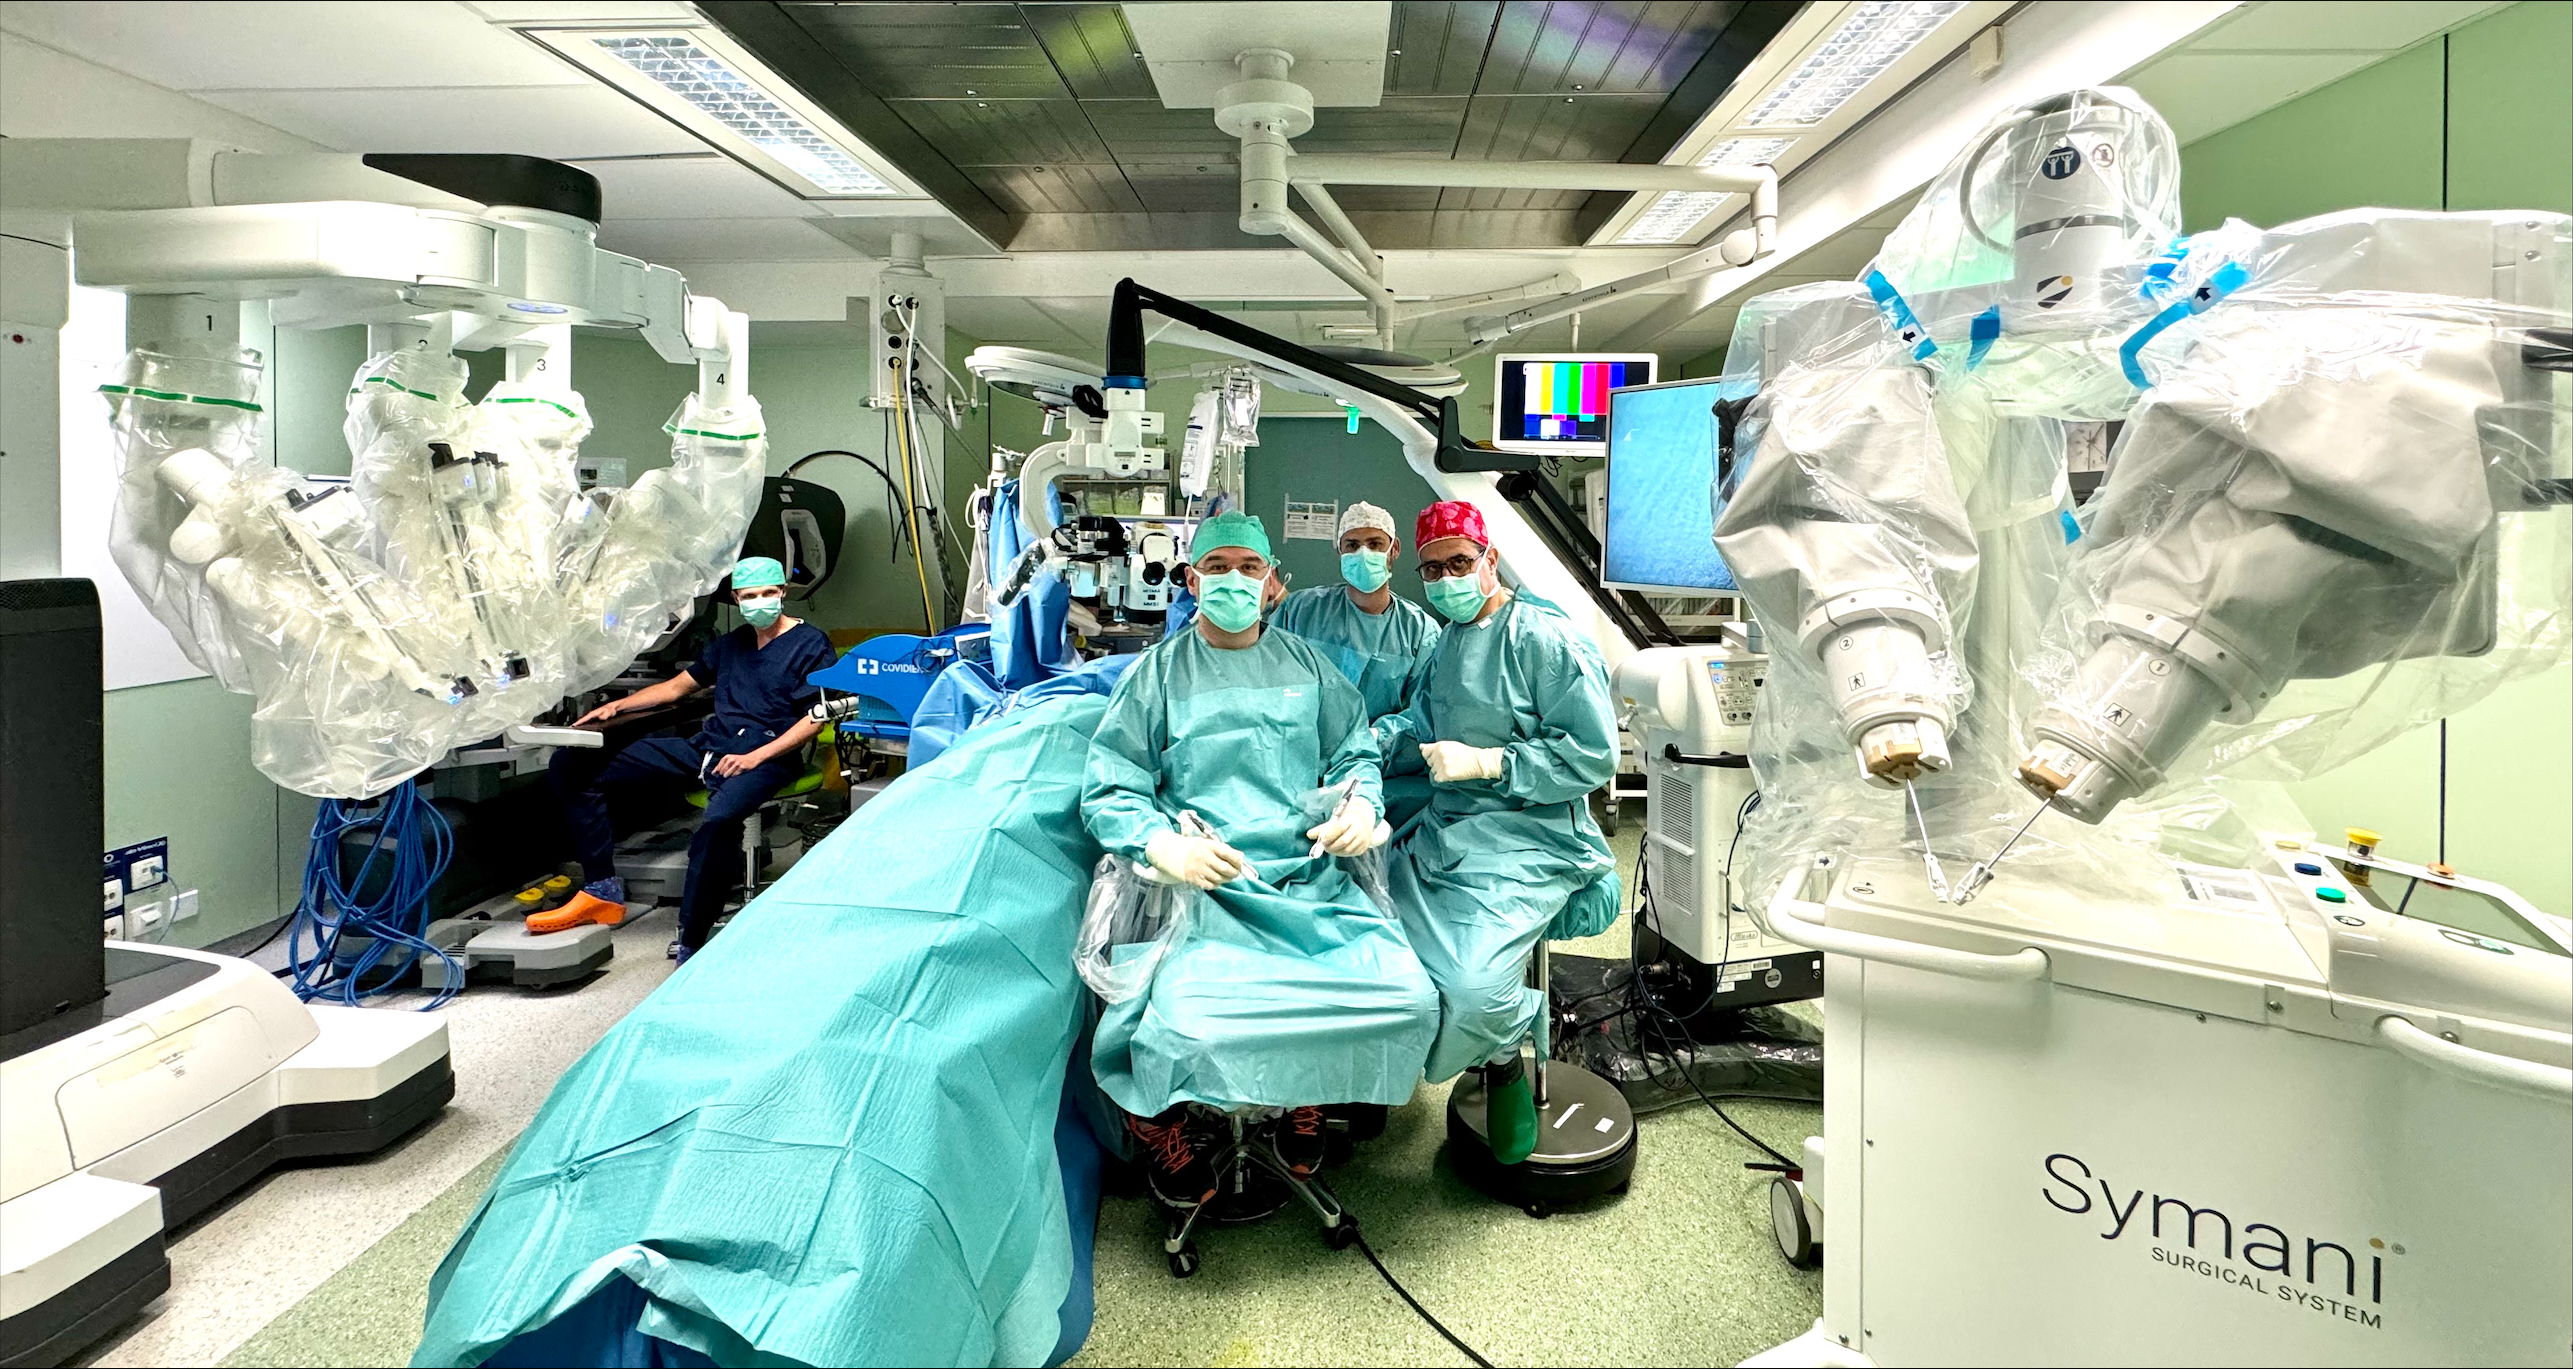 The team that performed the operation successfully: Dr Schoneveld, Prof Nistor, Dr Giunta, Prof Hamdi.